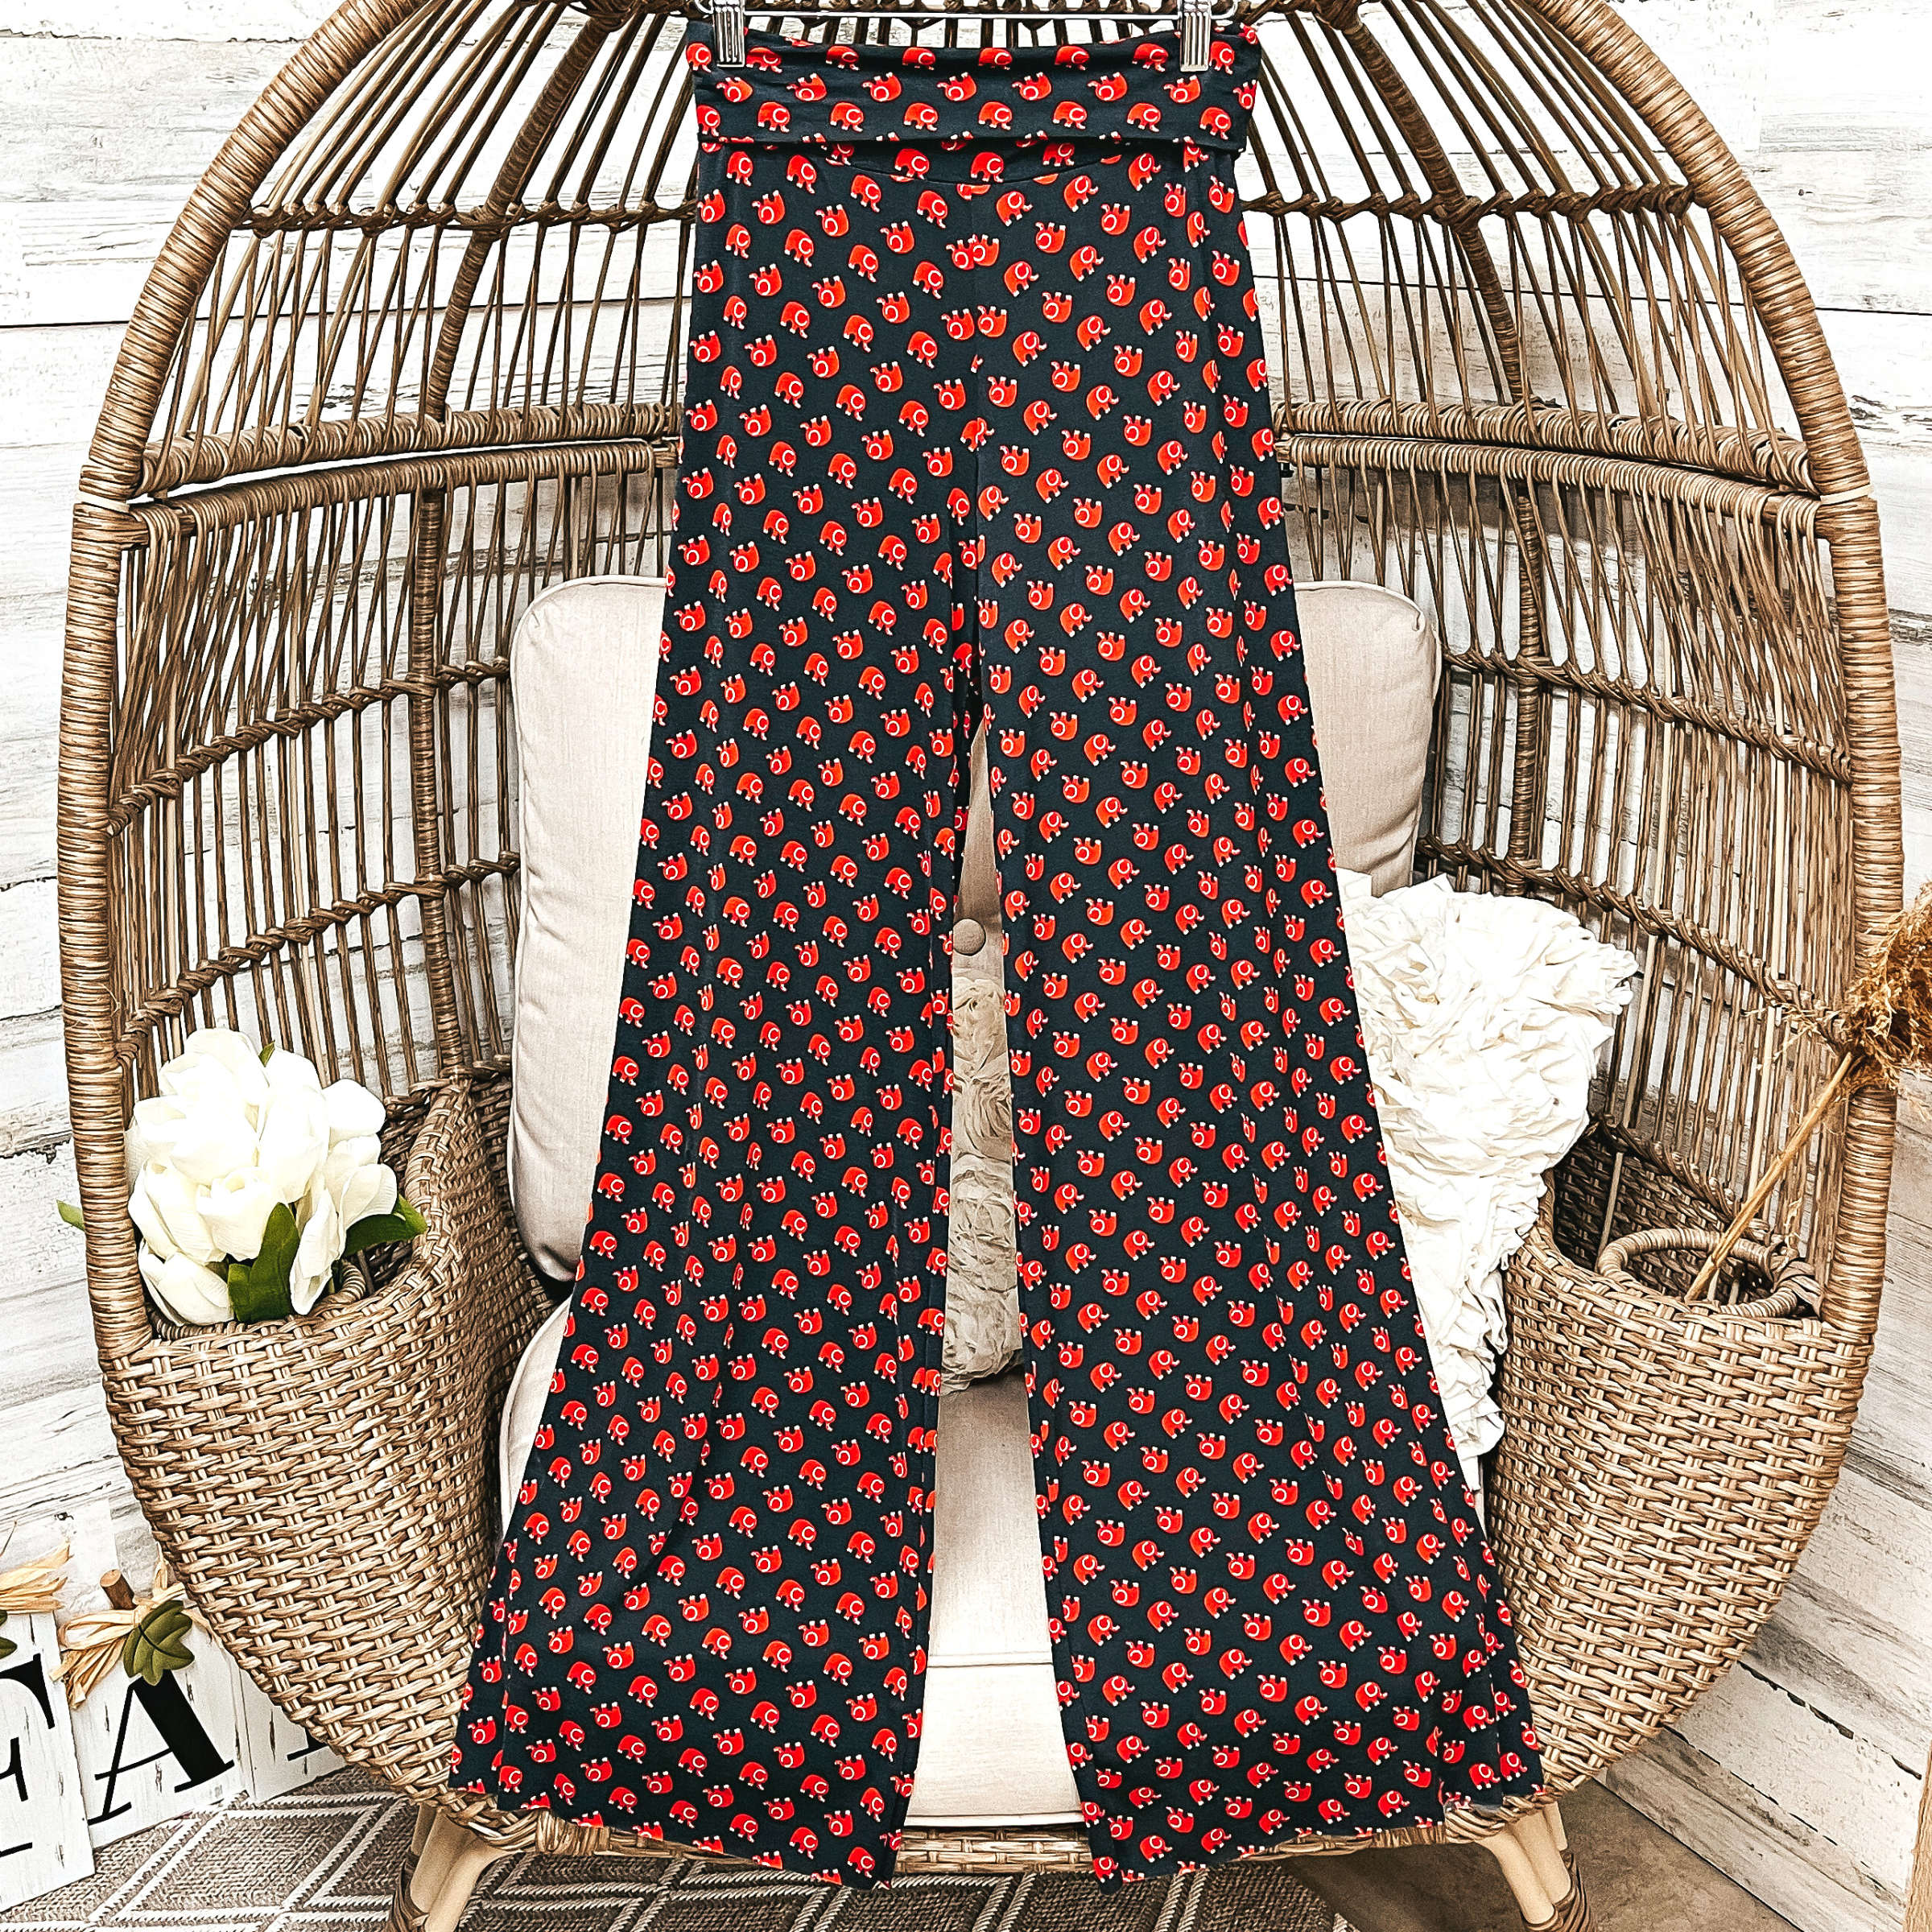 Elephant Print Wide Leg Pants in Black and Red - Giddy Up Glamour Boutique